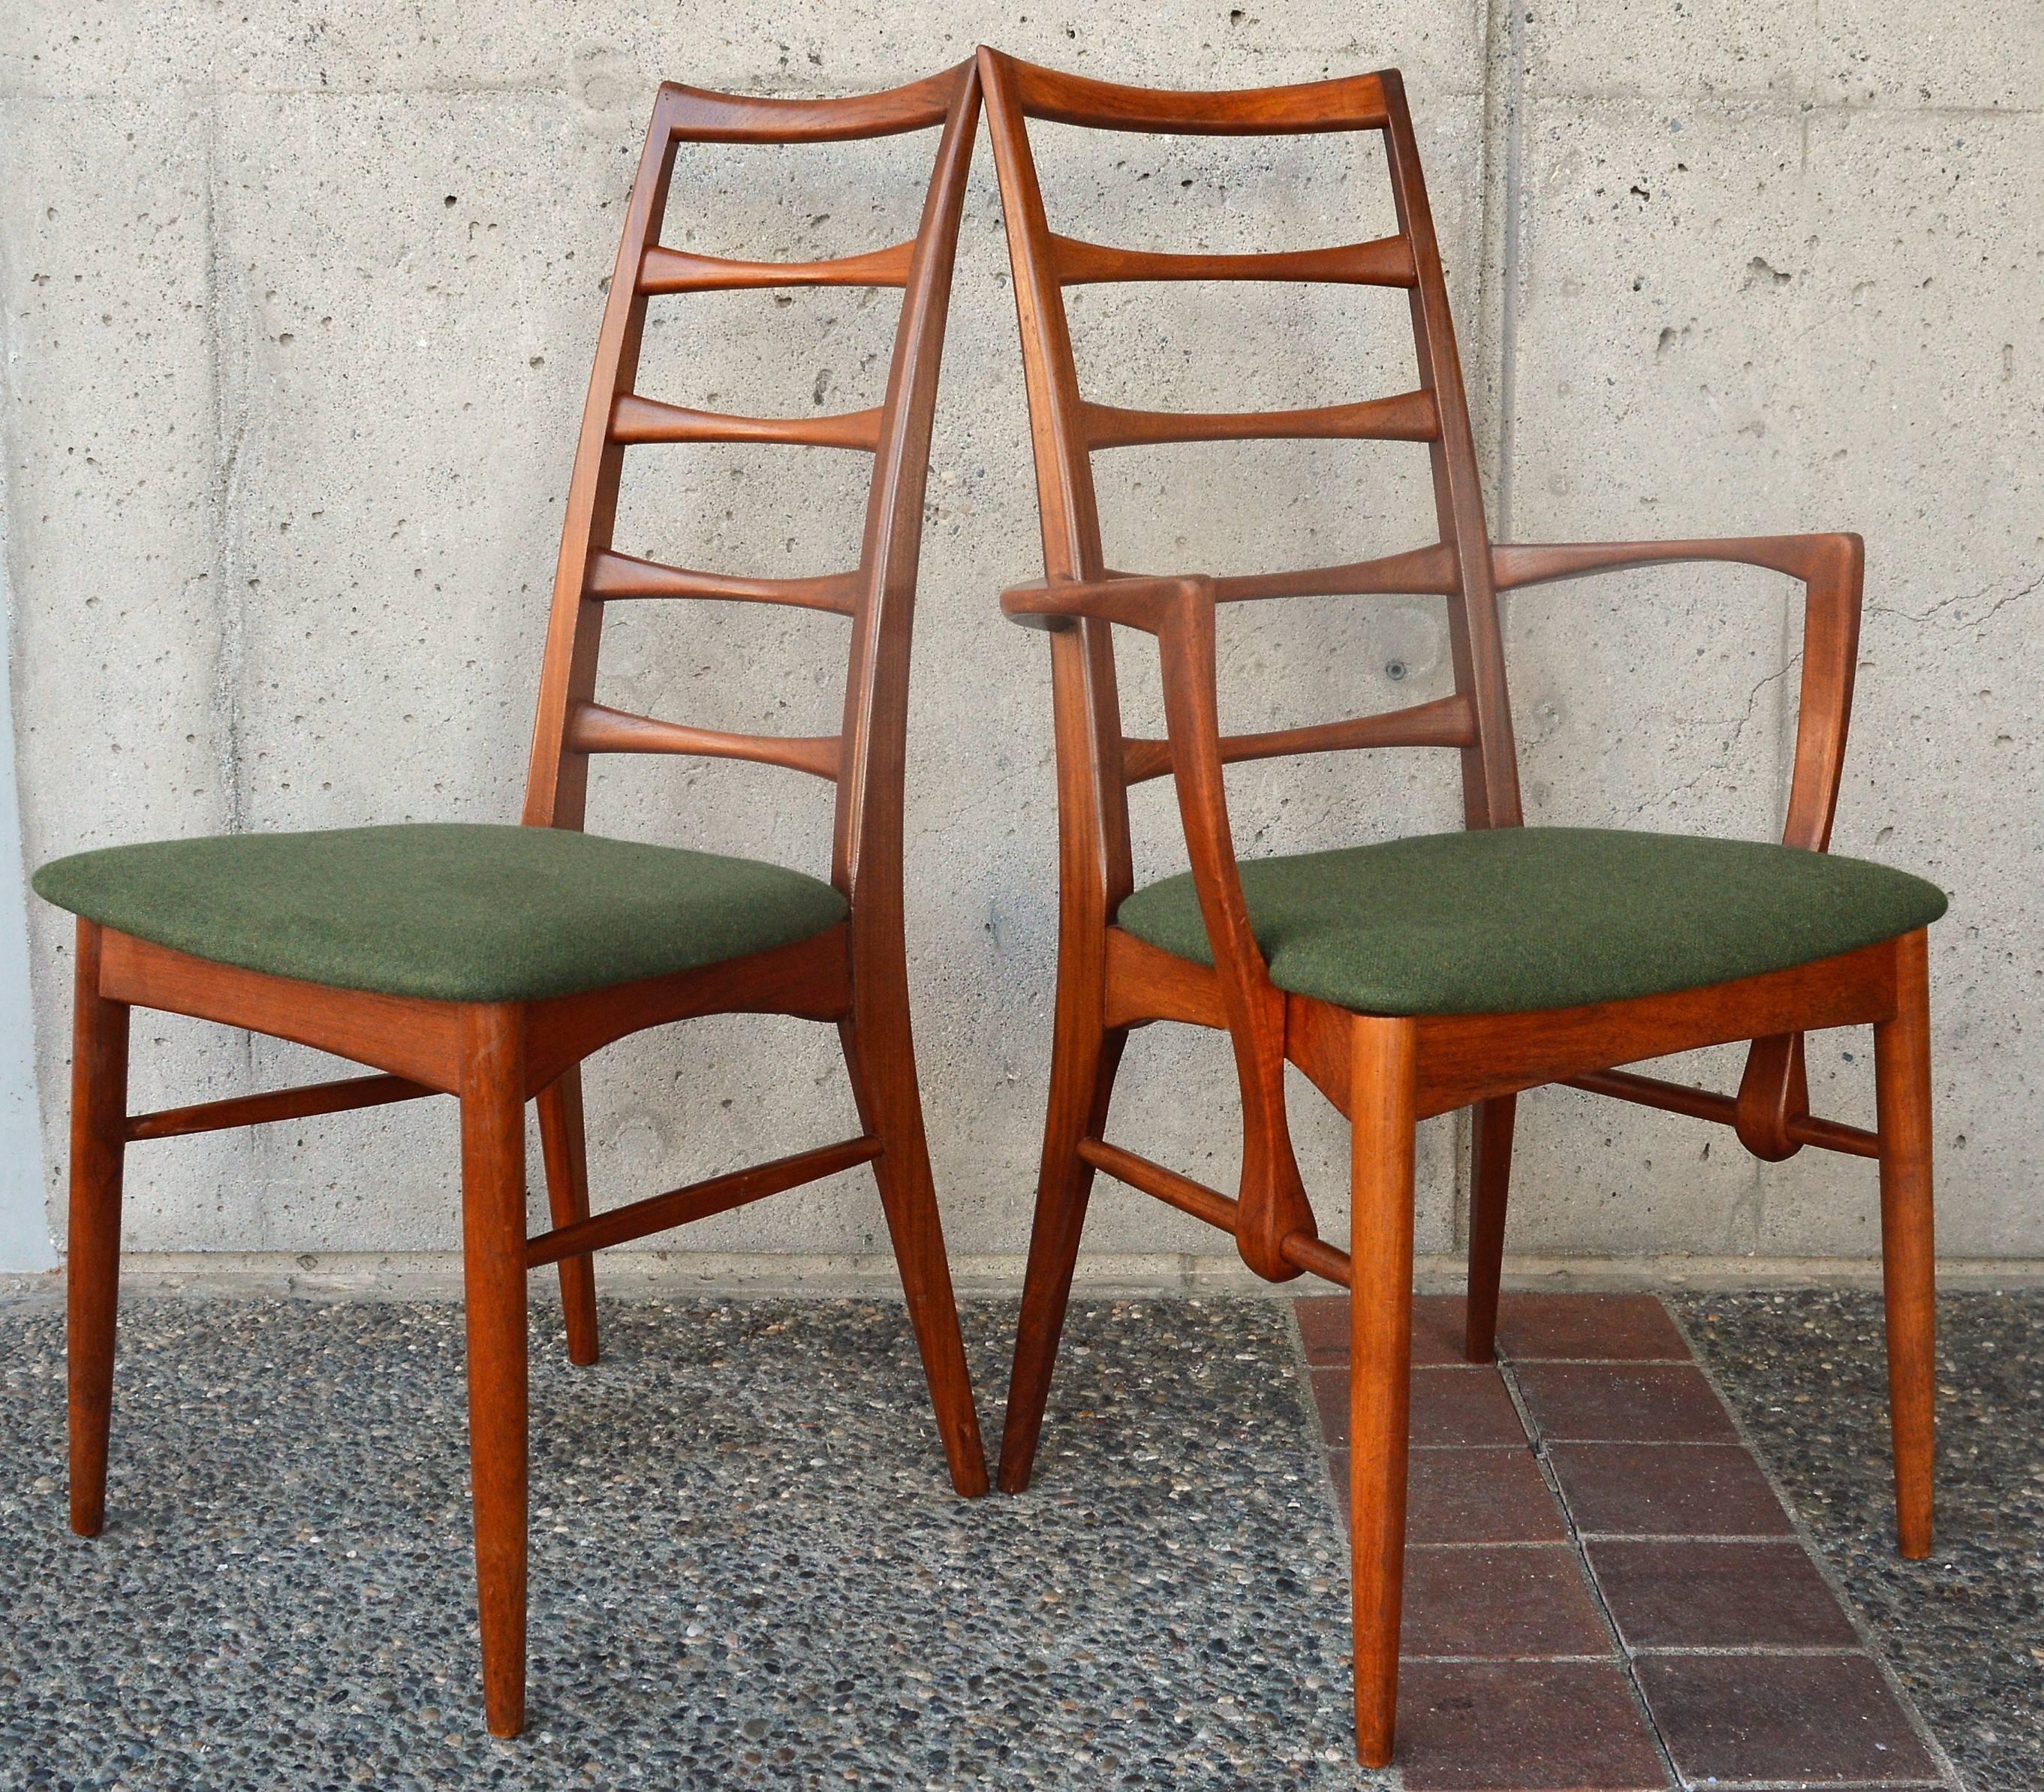 This stellar set of top quality Danish modern solid teak dining chairs were designed by Niels Koefoeds for Koefoeds Hornslet in the 1960s, known as the Liz or Lis chair, and bear the Danish Quality Control symbol. The chairs feature a two tone